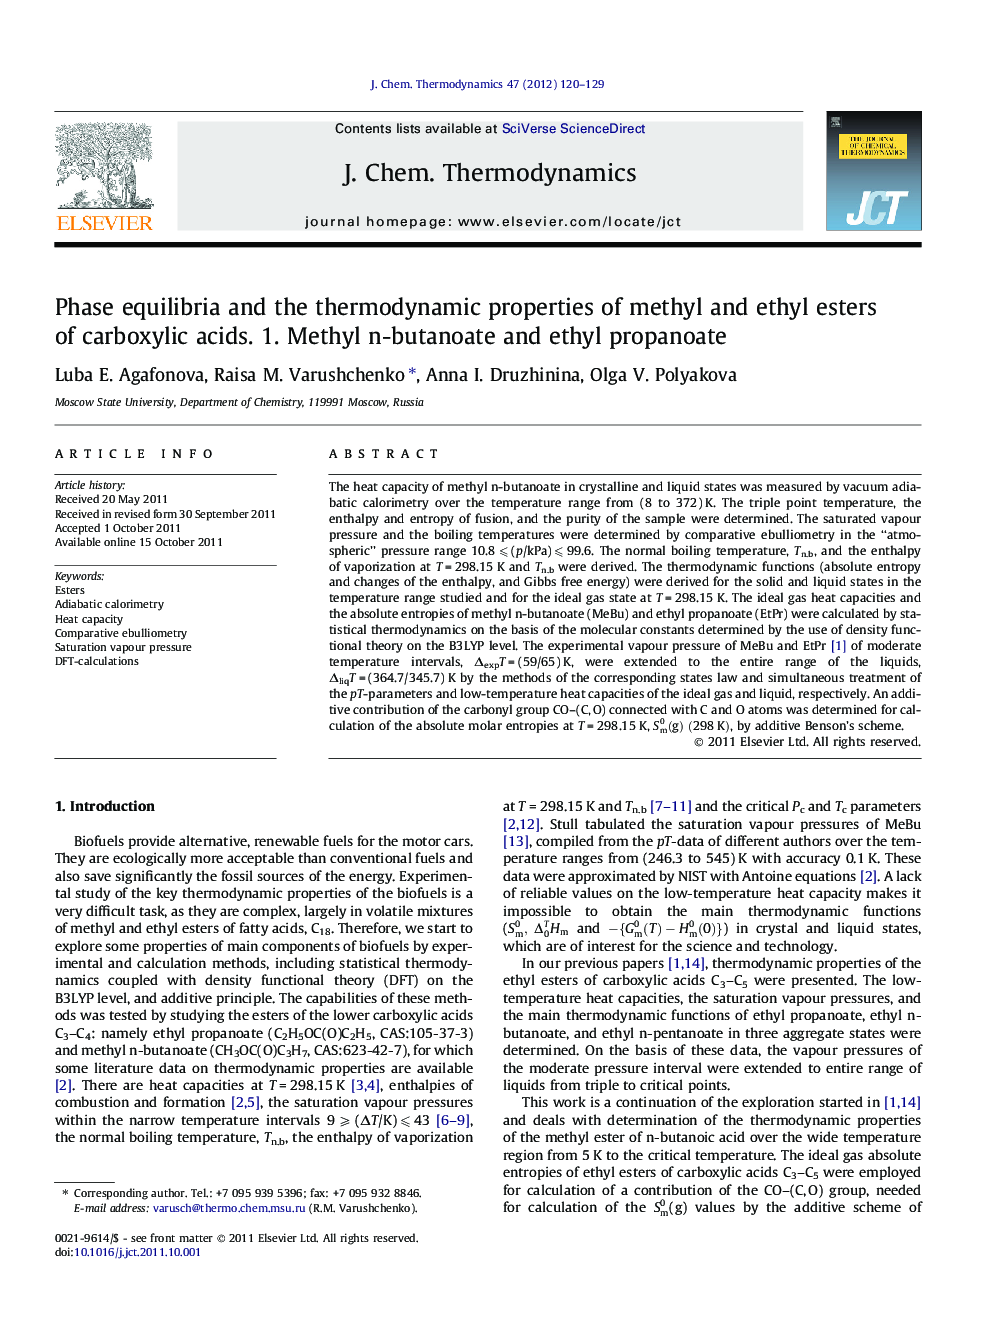 Phase equilibria and the thermodynamic properties of methyl and ethyl esters of carboxylic acids. 1. Methyl n-butanoate and ethyl propanoate